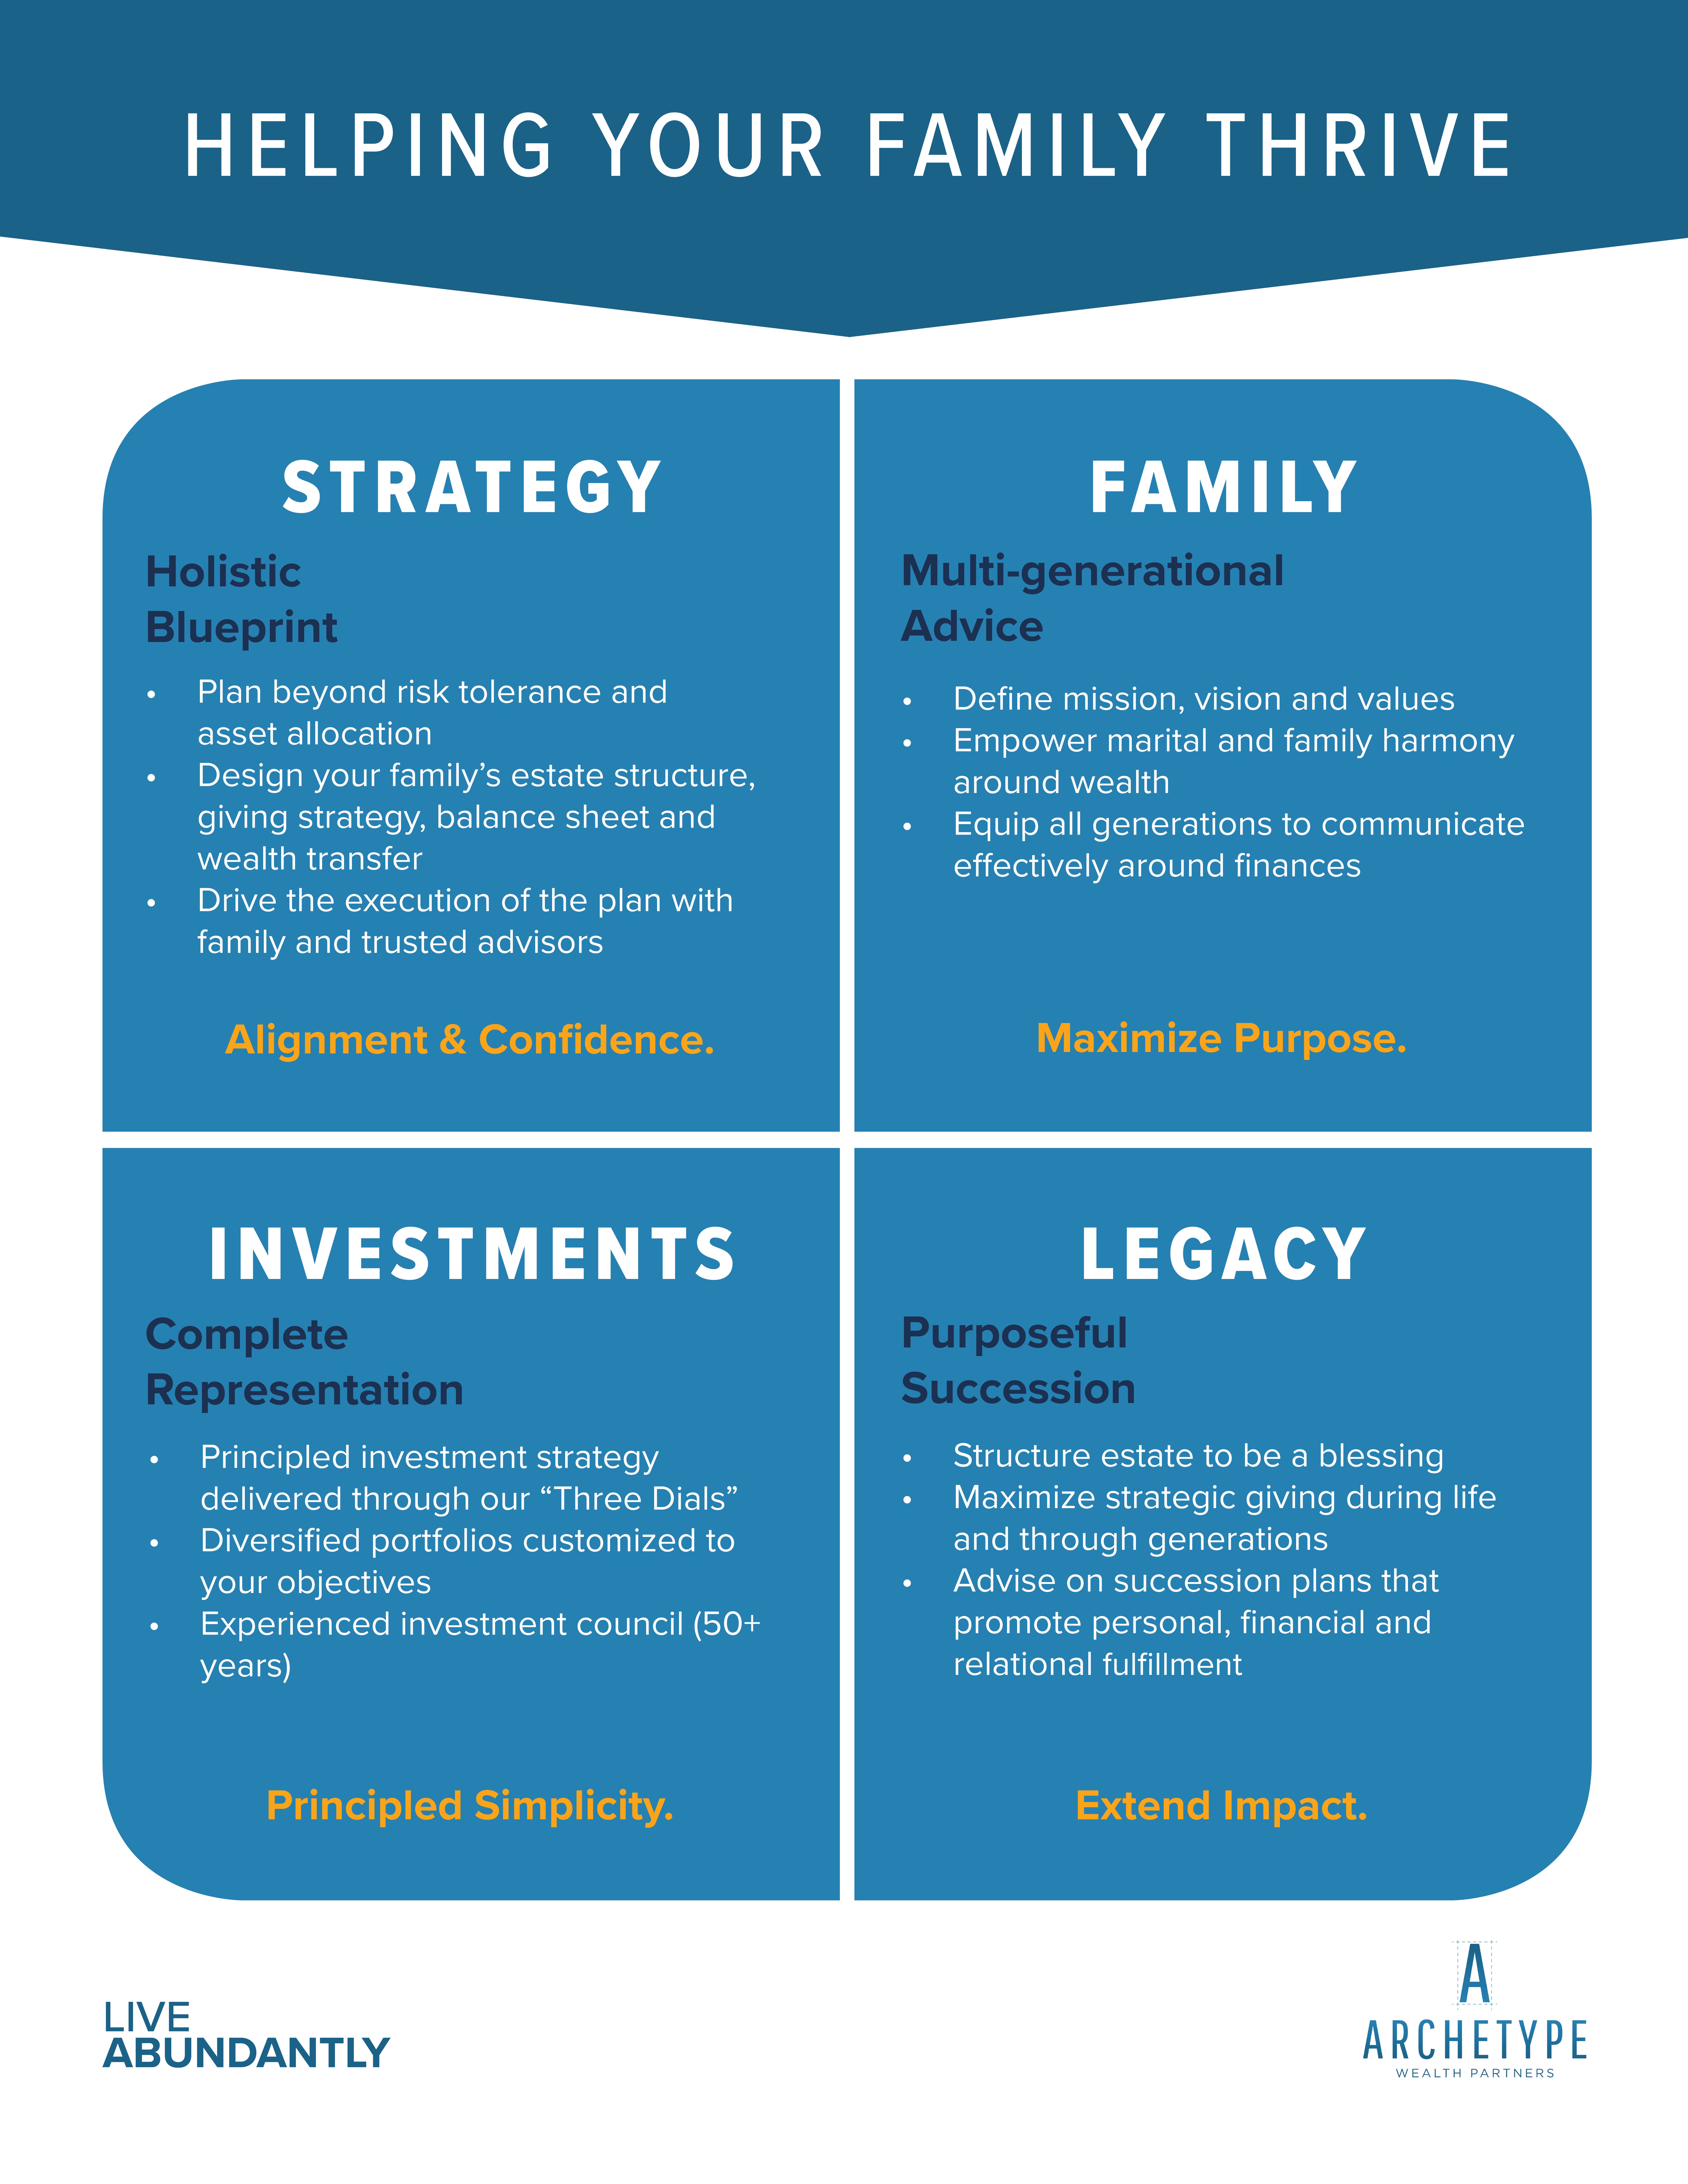 Archetype Wealth's 4 Quadrants: Strategy, Family, Investments and Legacy